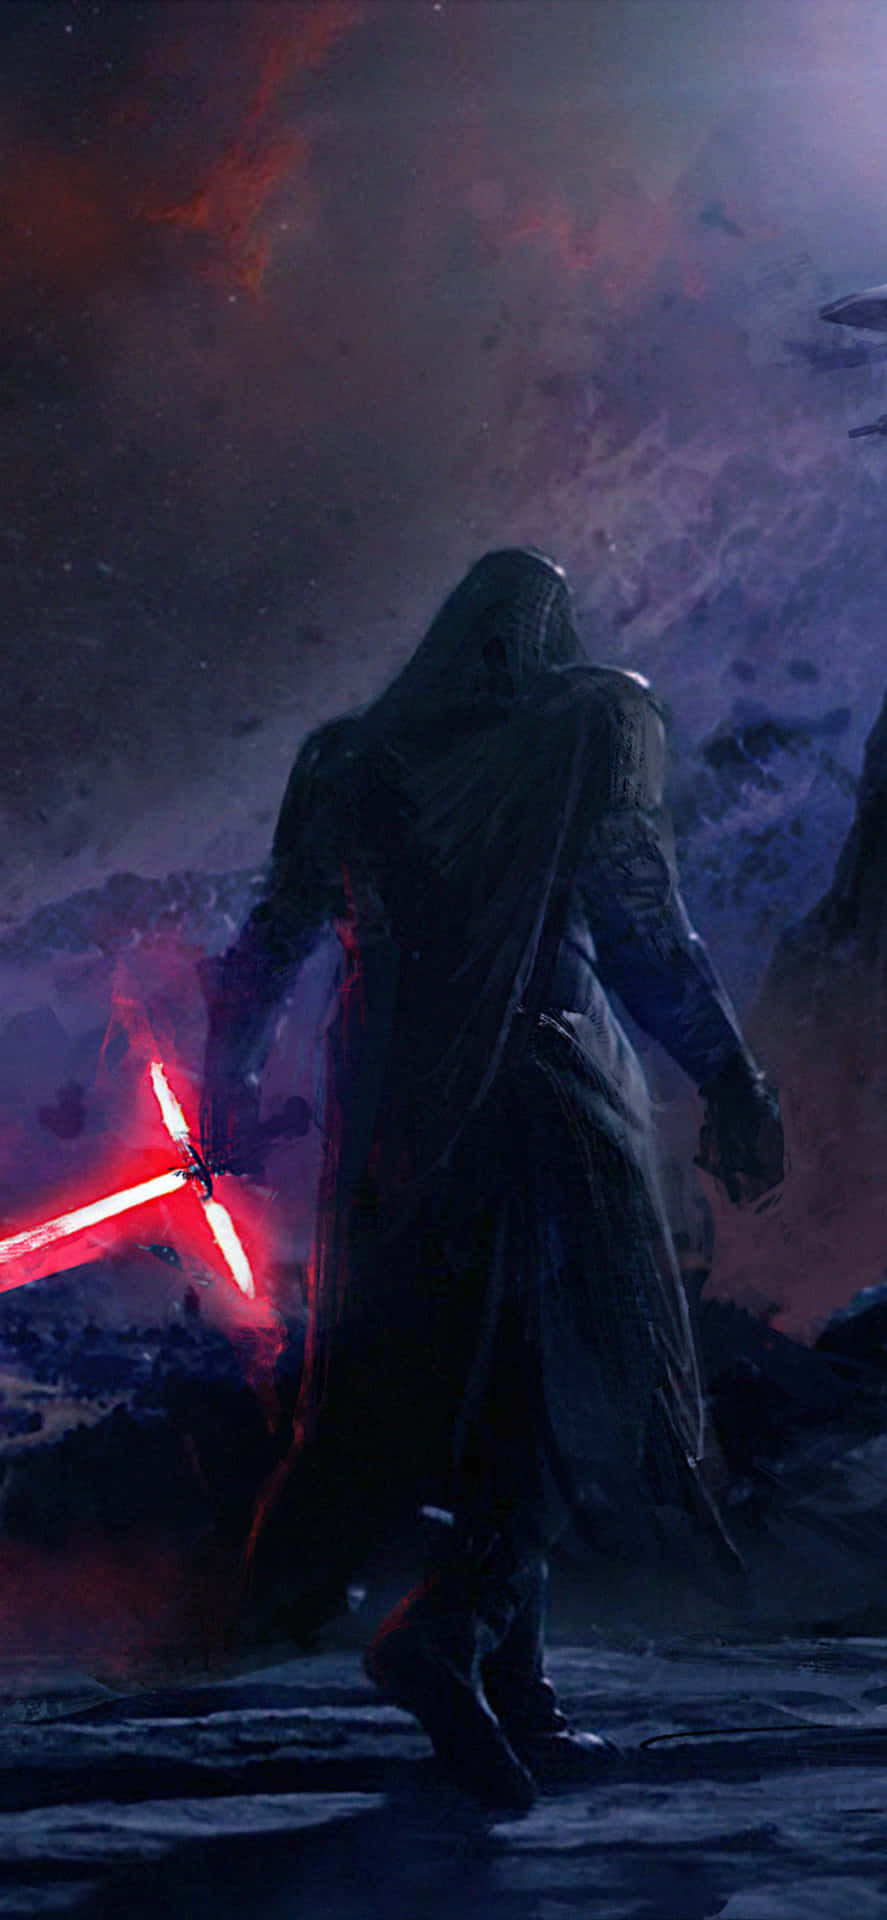 Supreme Leader Kylo Ren strikes an intimidating pose on the Supremacy Wallpaper